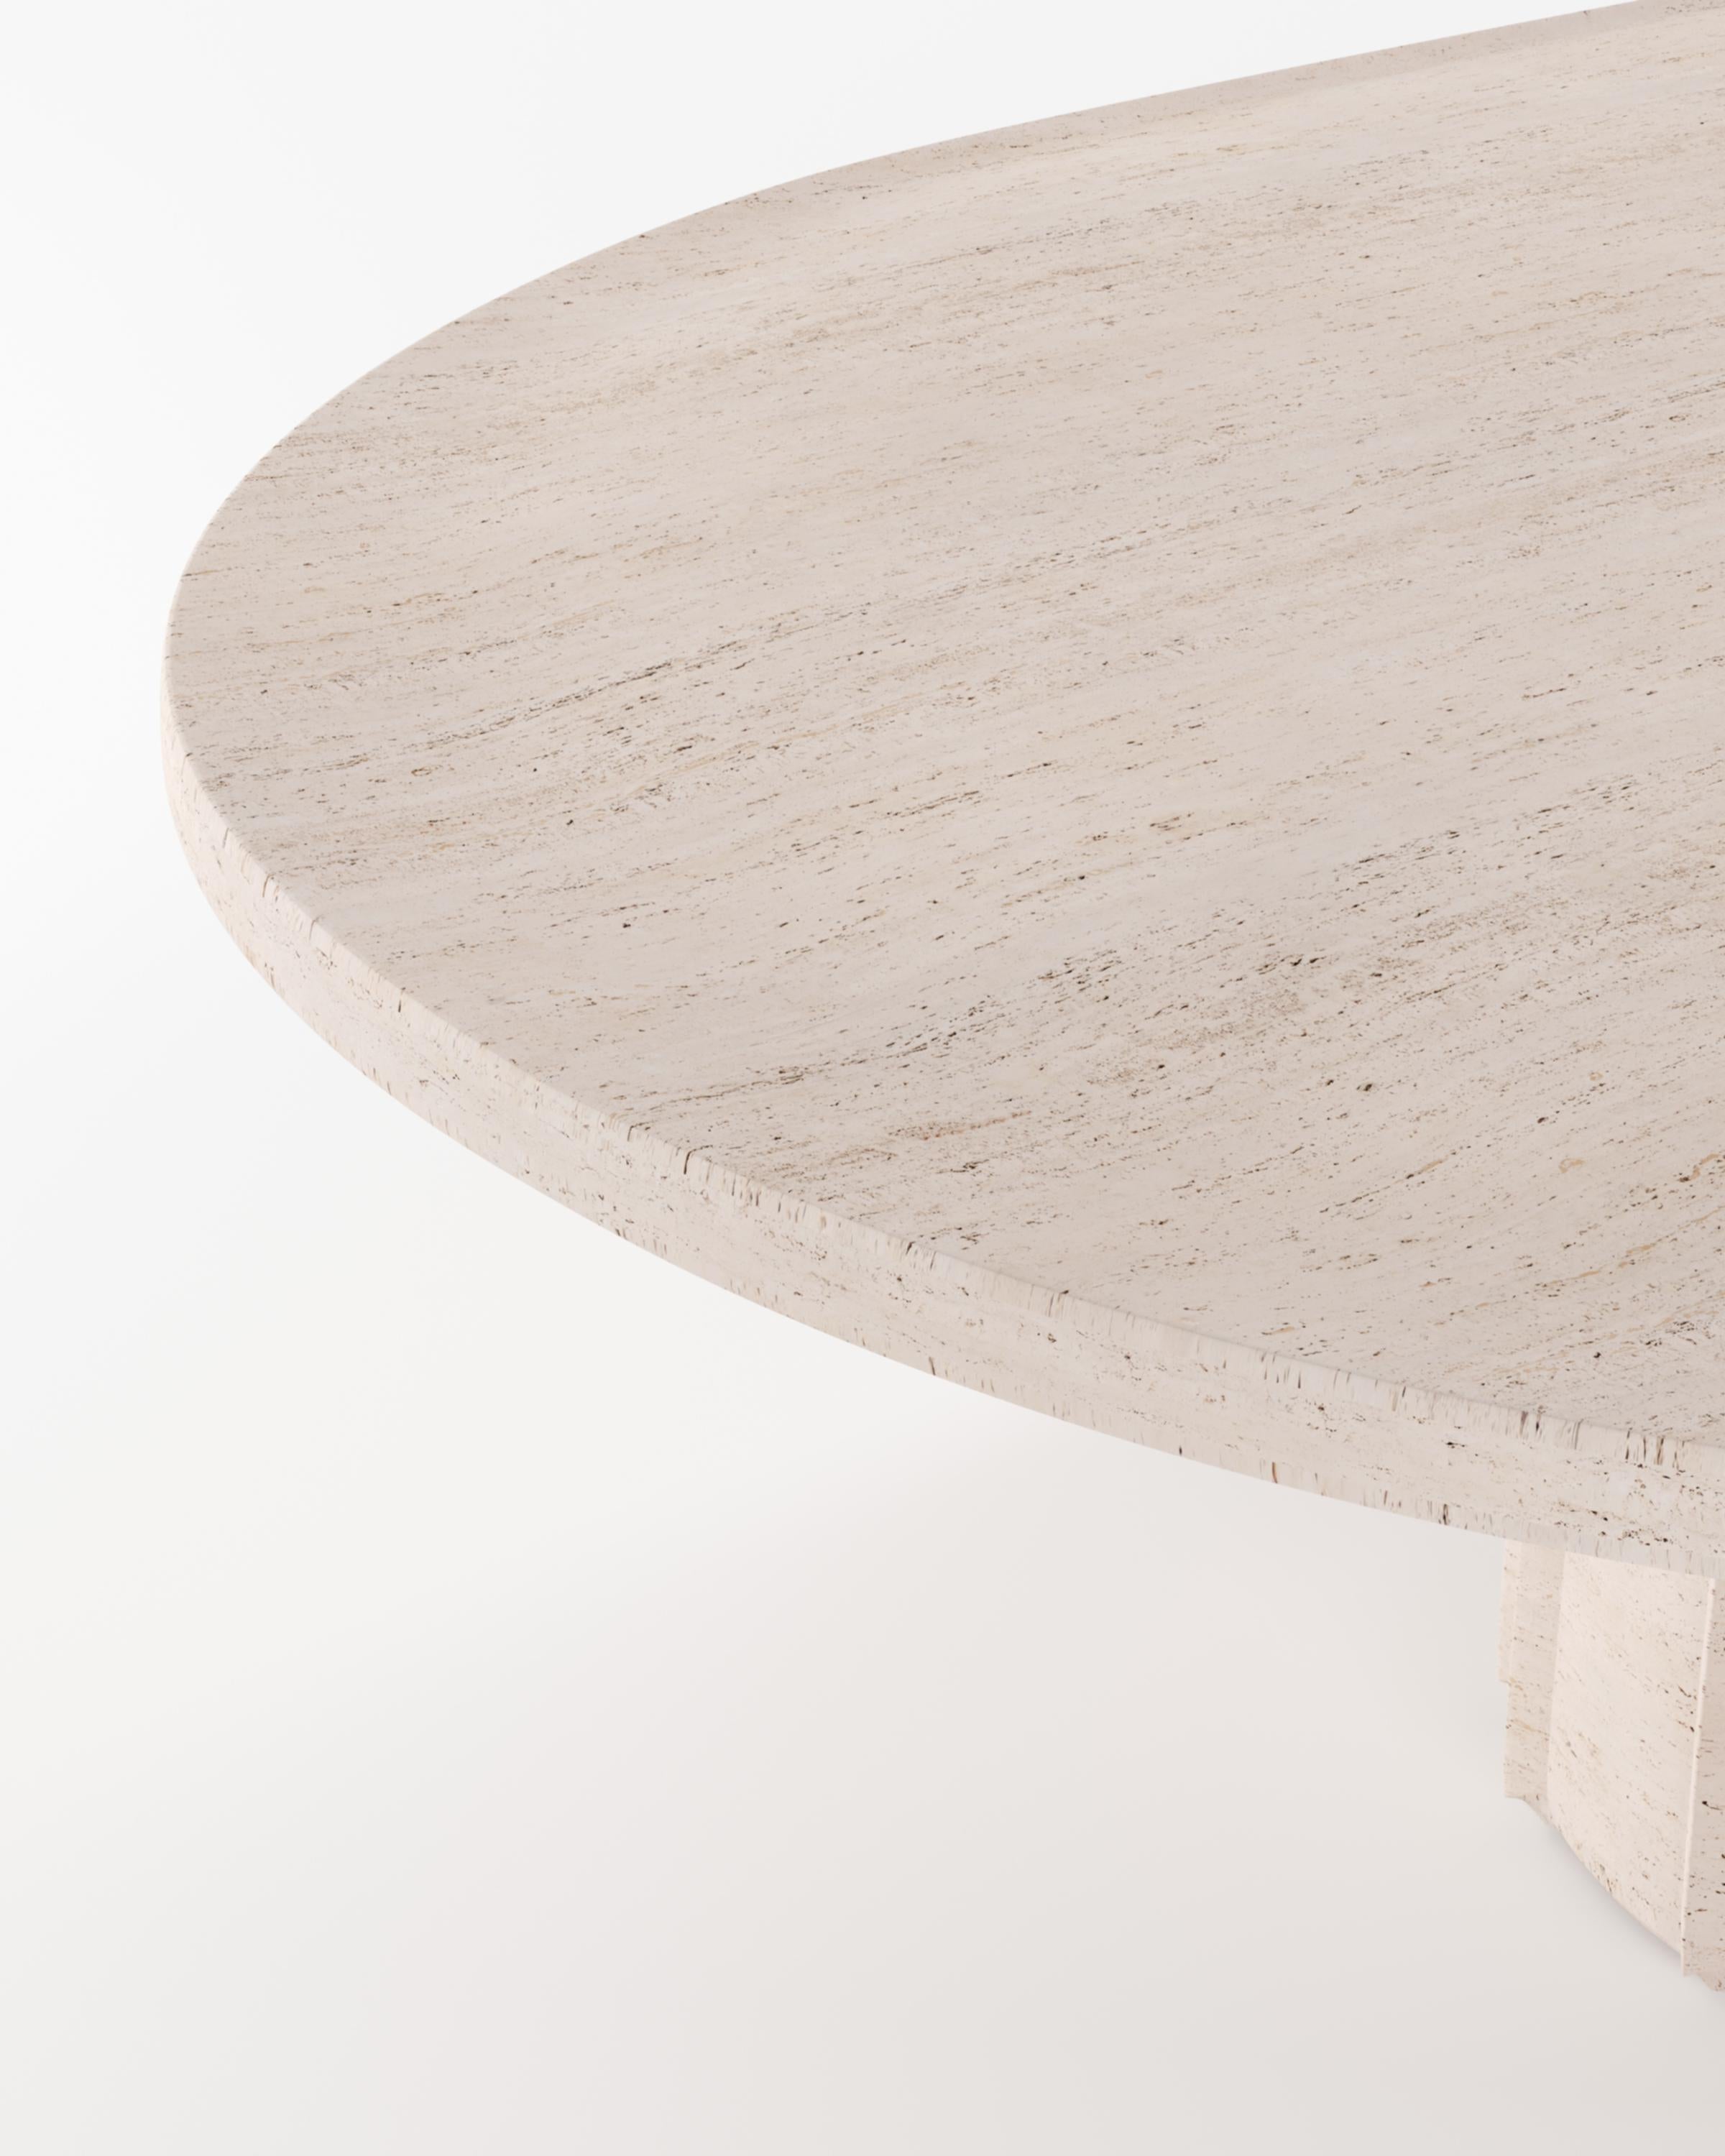 Collector- 21st Century Designed by Alter Ego Djembe Center Table Travertino

DIMENSIONS:
W 180 cm  70,8”
D 70 cm  27,5”
H 31 cm  12,2”


PRODUCT FEATURES
Oak

PRODUCT OPTIONS
Available in all COLLECTOR wood swatches
Available in all COLLECTOR